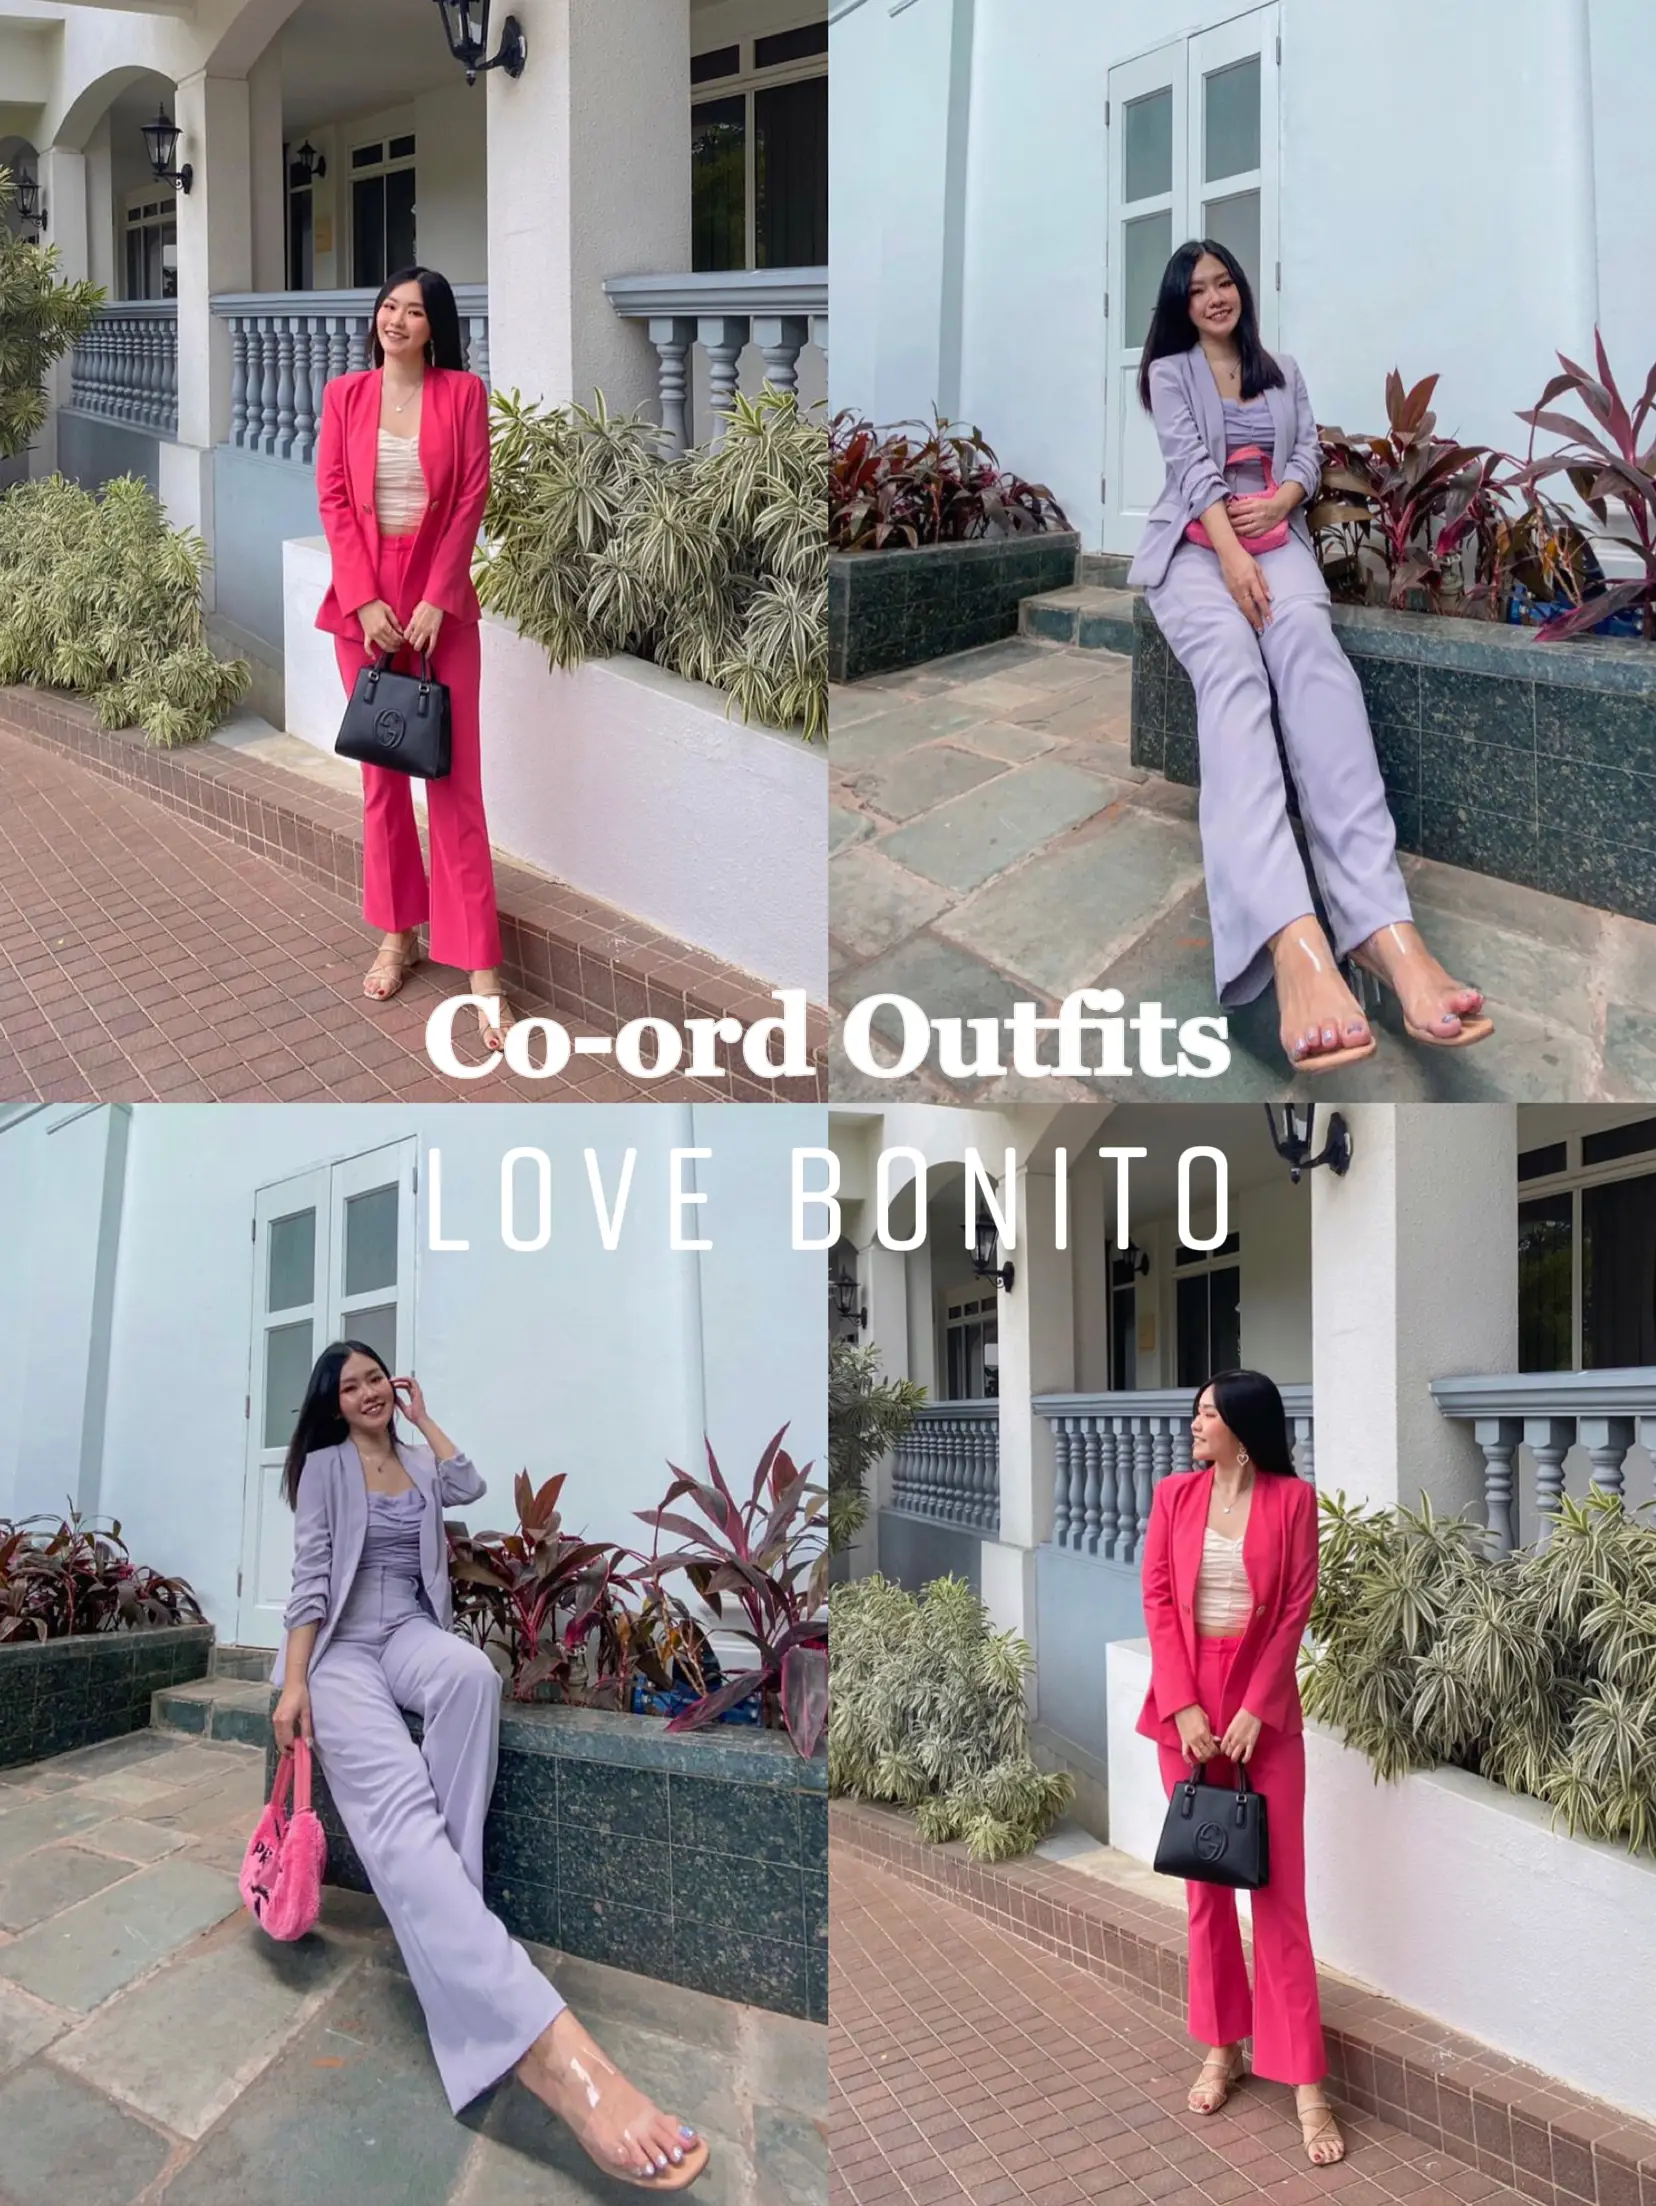 My favourite co-ord outfits from Love Bonito 🫶🏼, Gallery posted by  Sylvia Lam